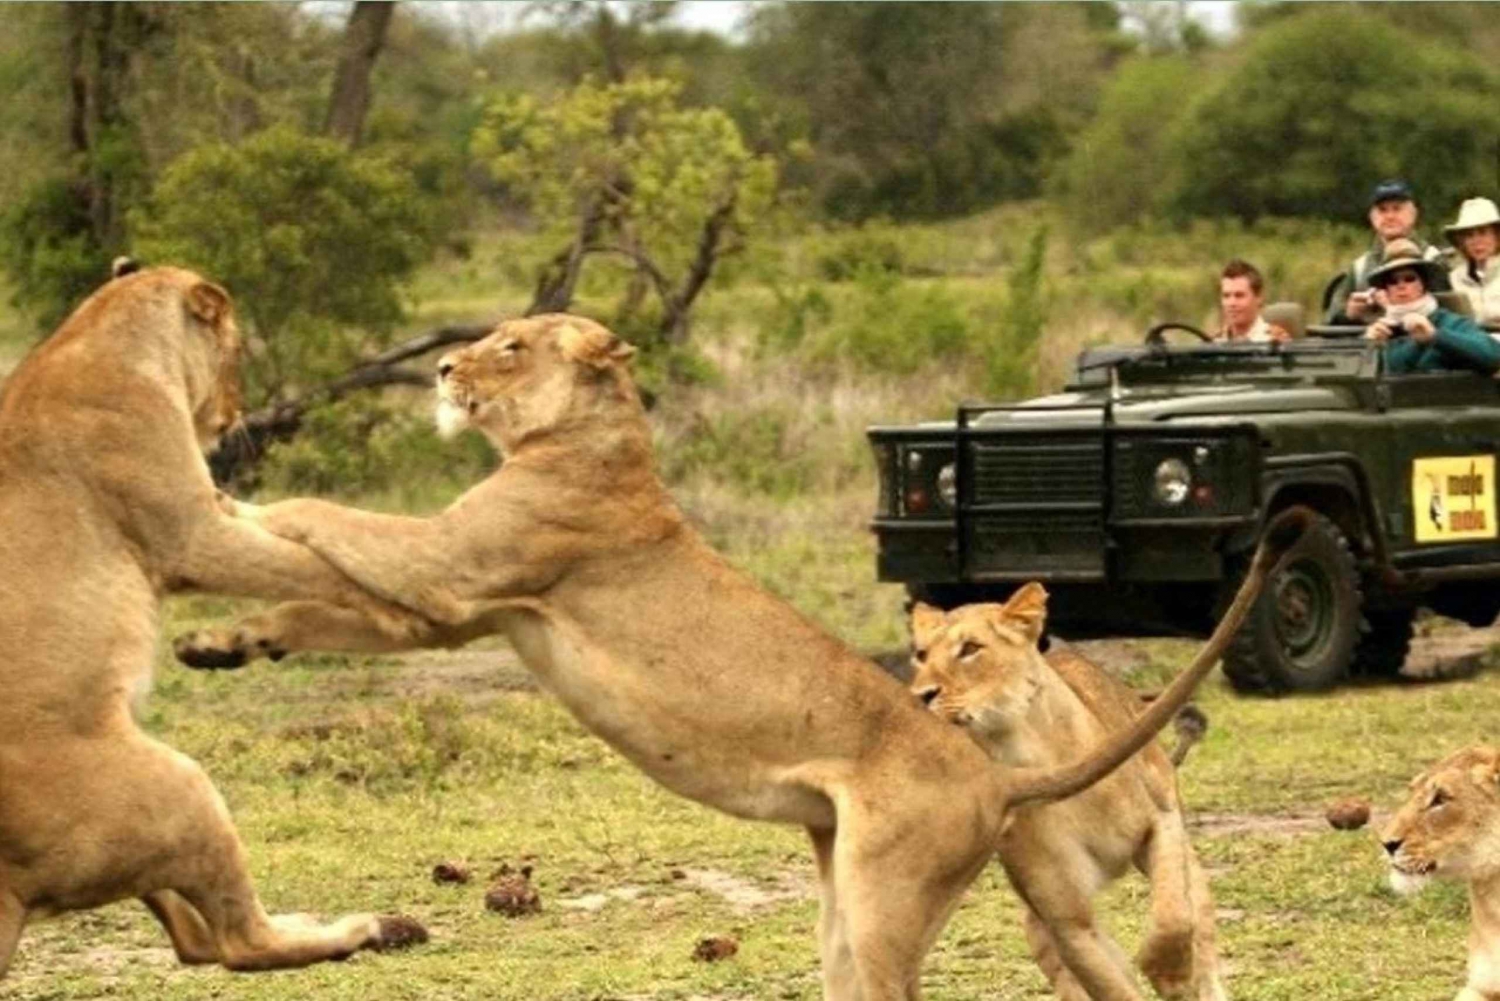 Tala Game Reserve & Natal Lion Park Day Tour From Durban